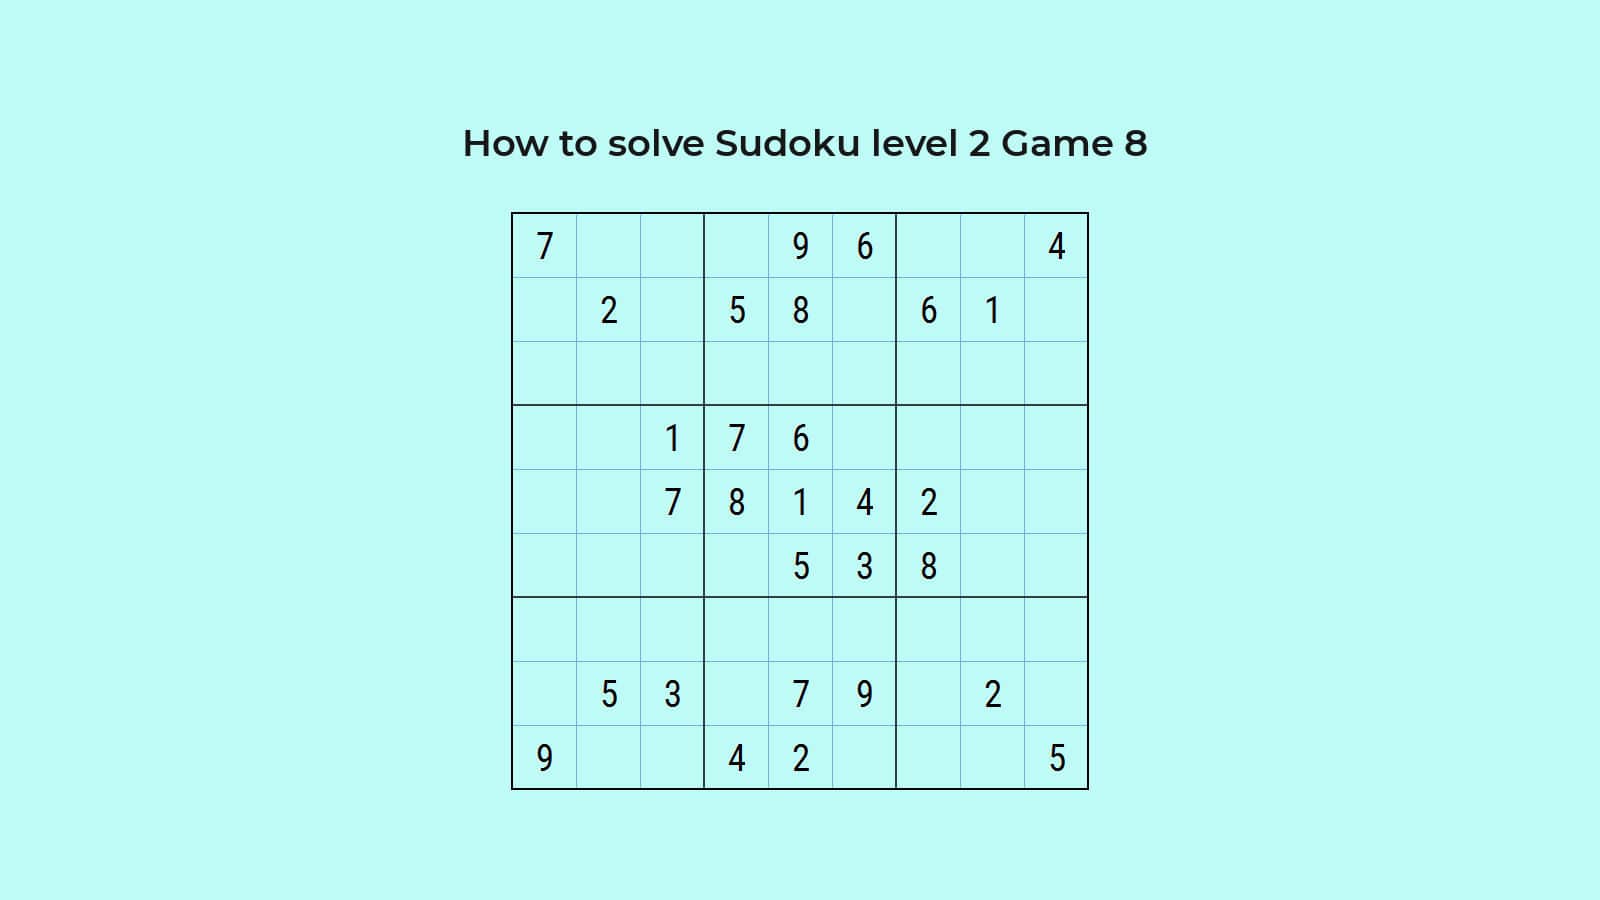 Sudoku level 2 game 8 Quick solution